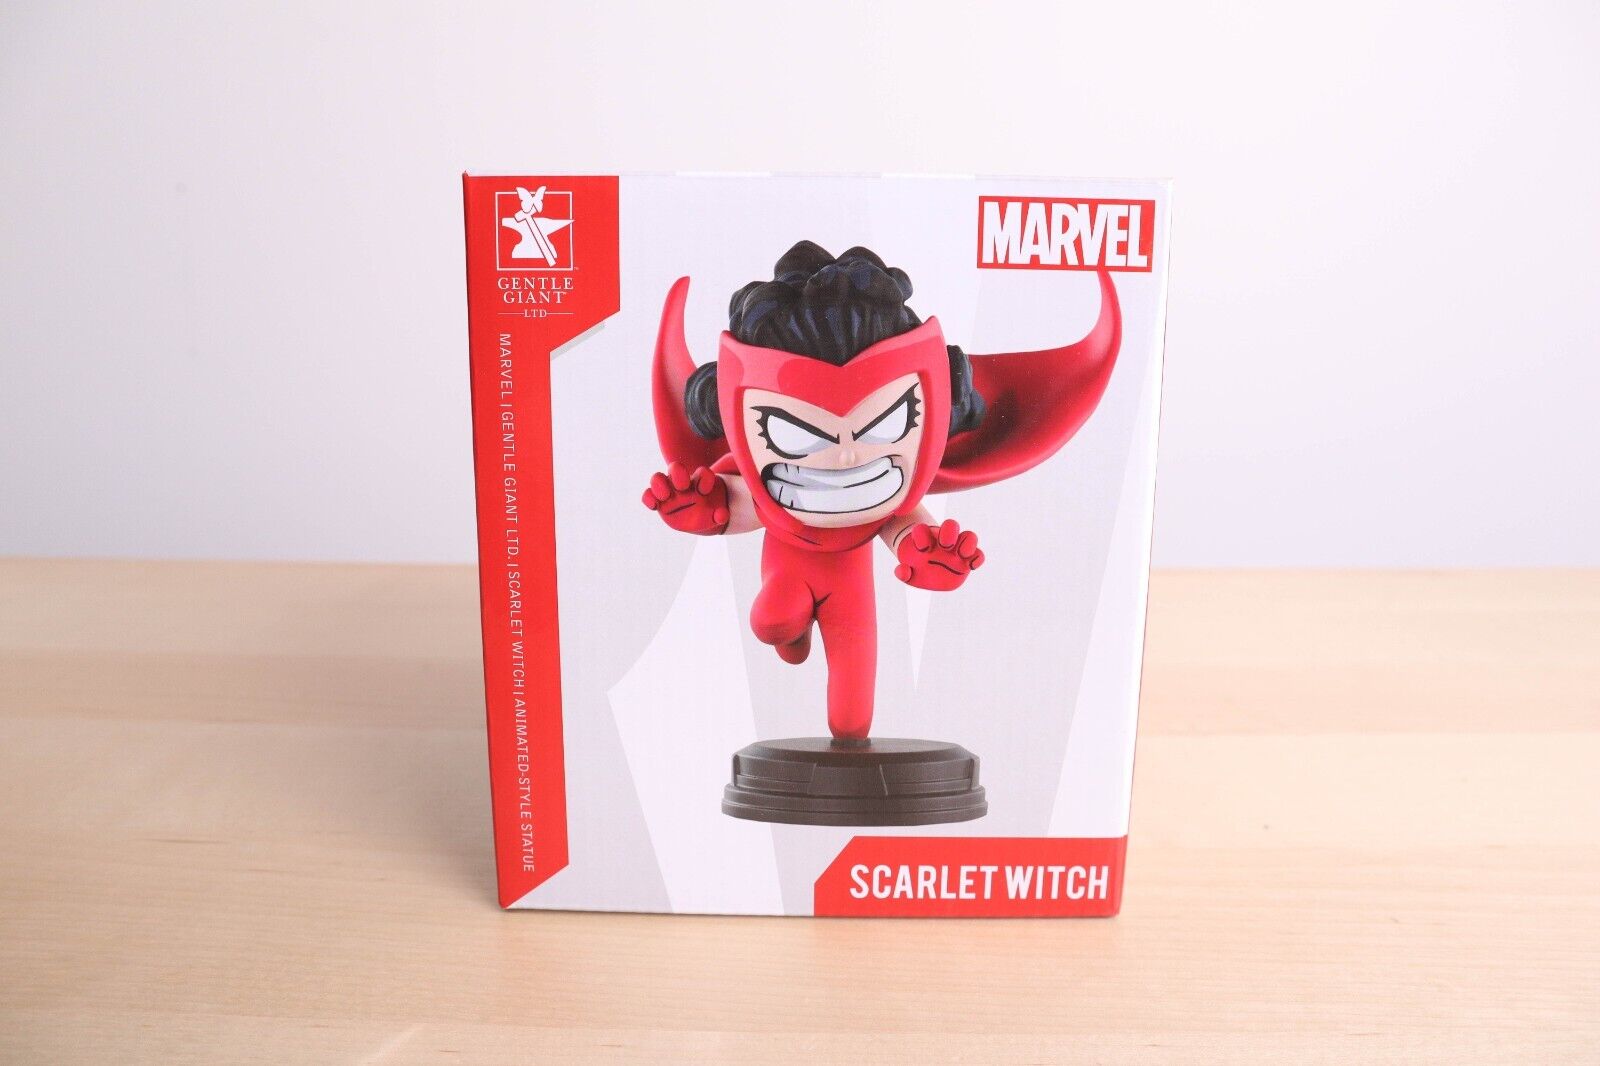 Gentle Giant Marvel Scarlet Witch Animated Statue Skottie Young